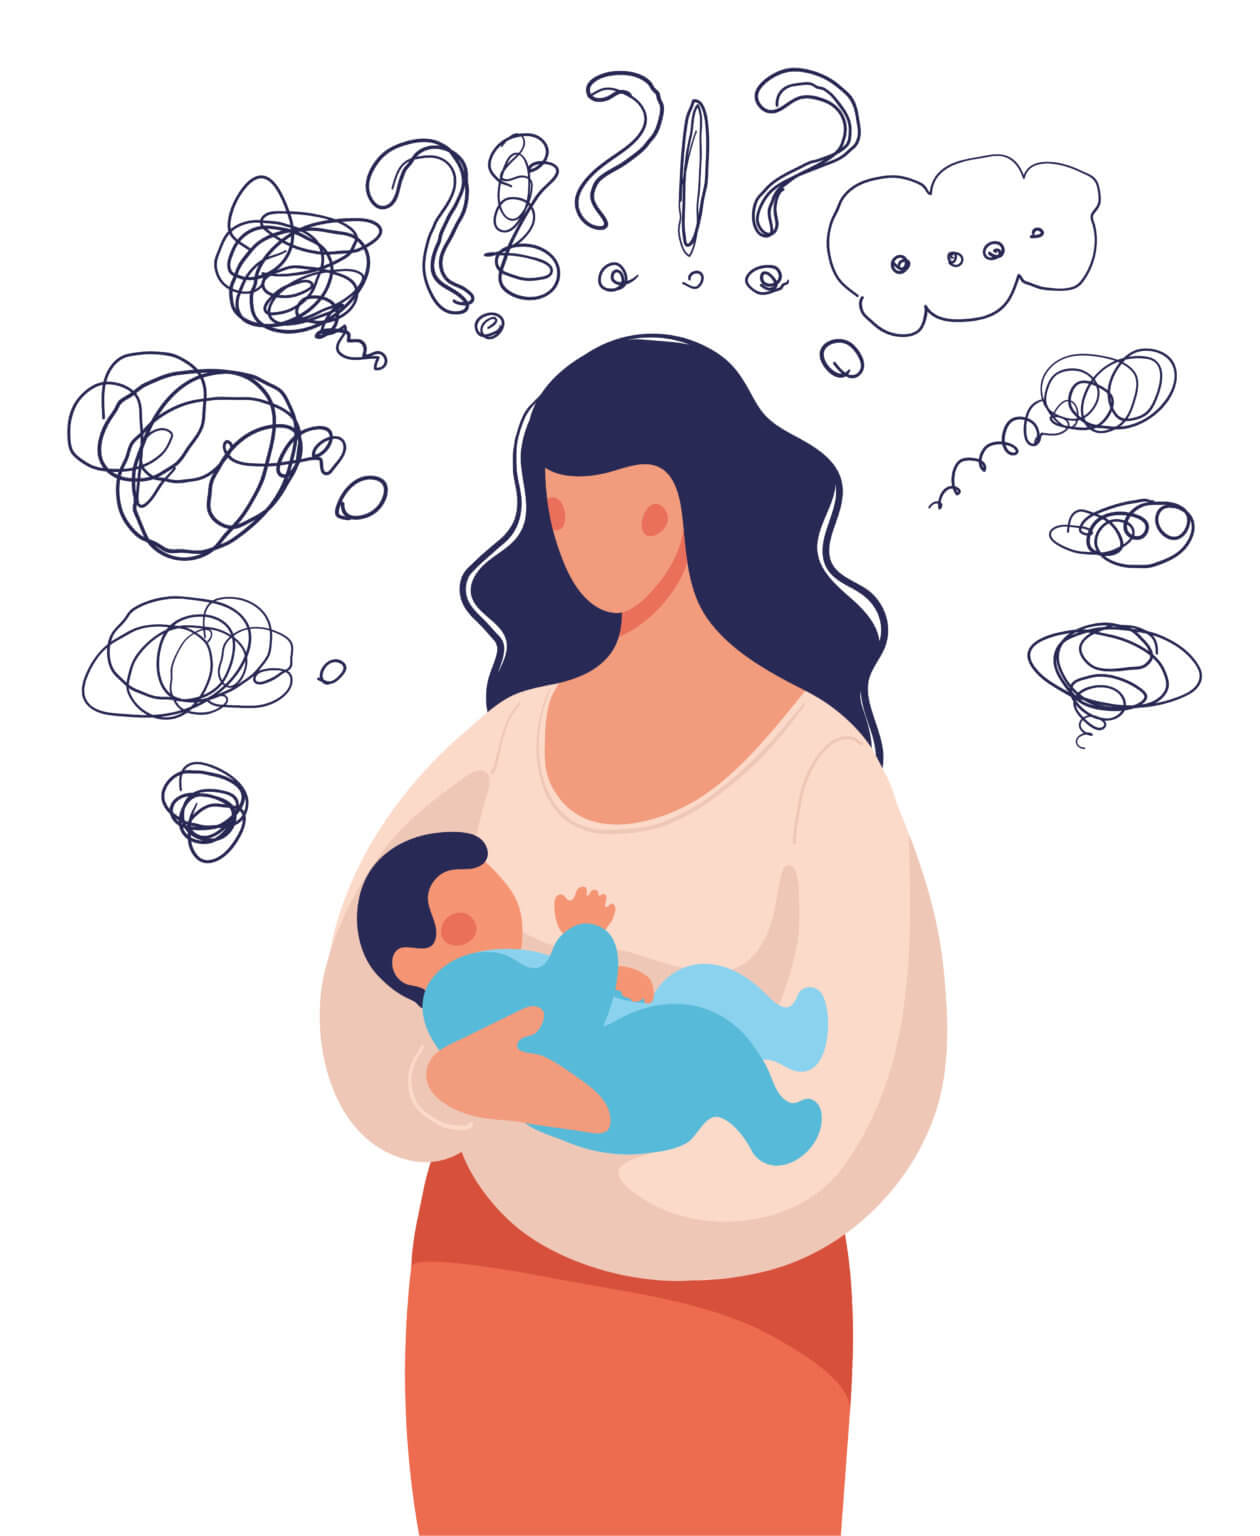 A woman with a child in her arms asks herself many questions. Conceptual illustration about postpartum depression, help for a young mother, family support. Flat cartoon illustration isolated on white background.